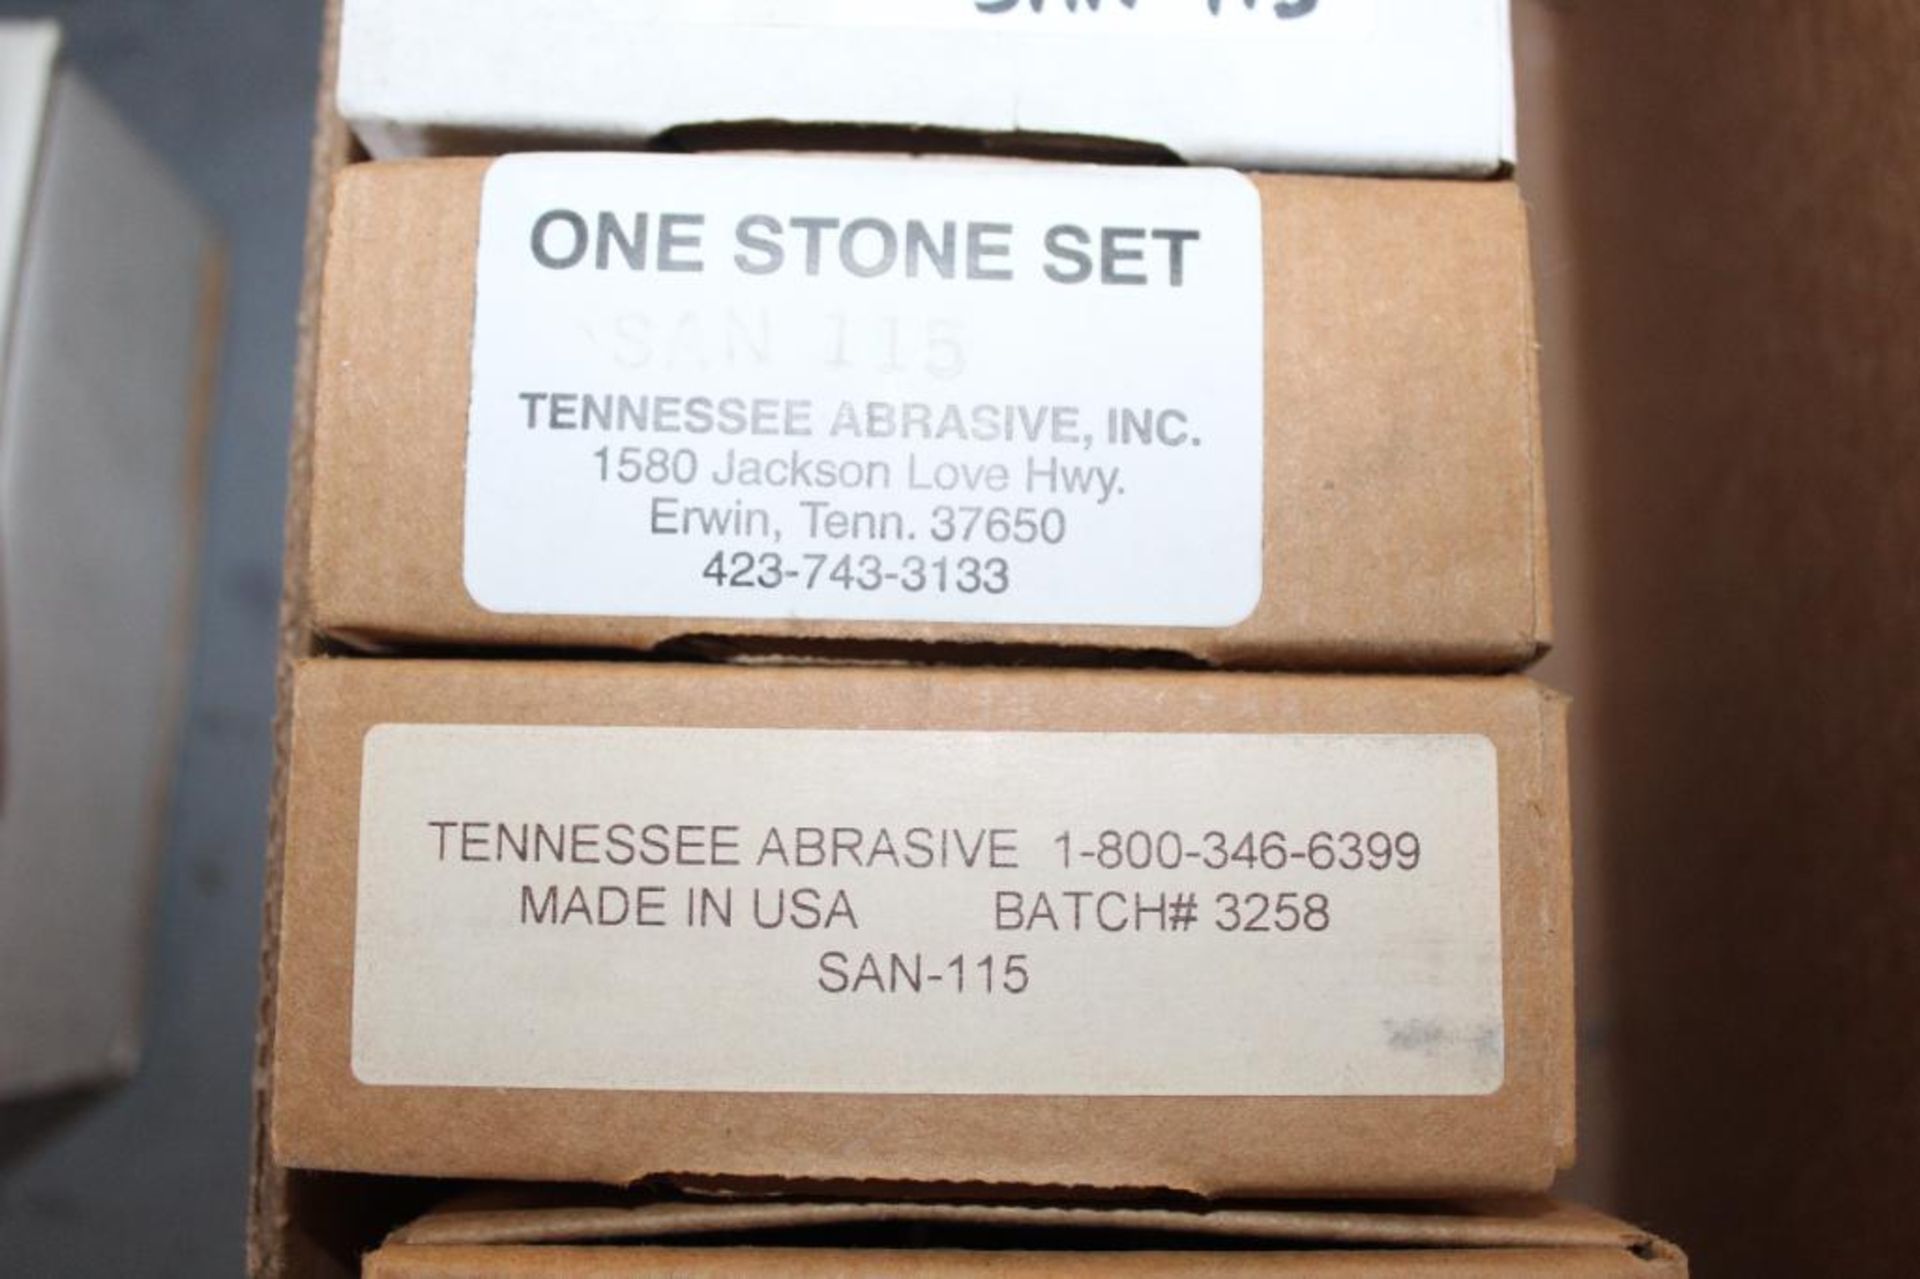 Lot of (6) Tennessee Abrasive Batch # 3258 SAN-115 - Image 5 of 6